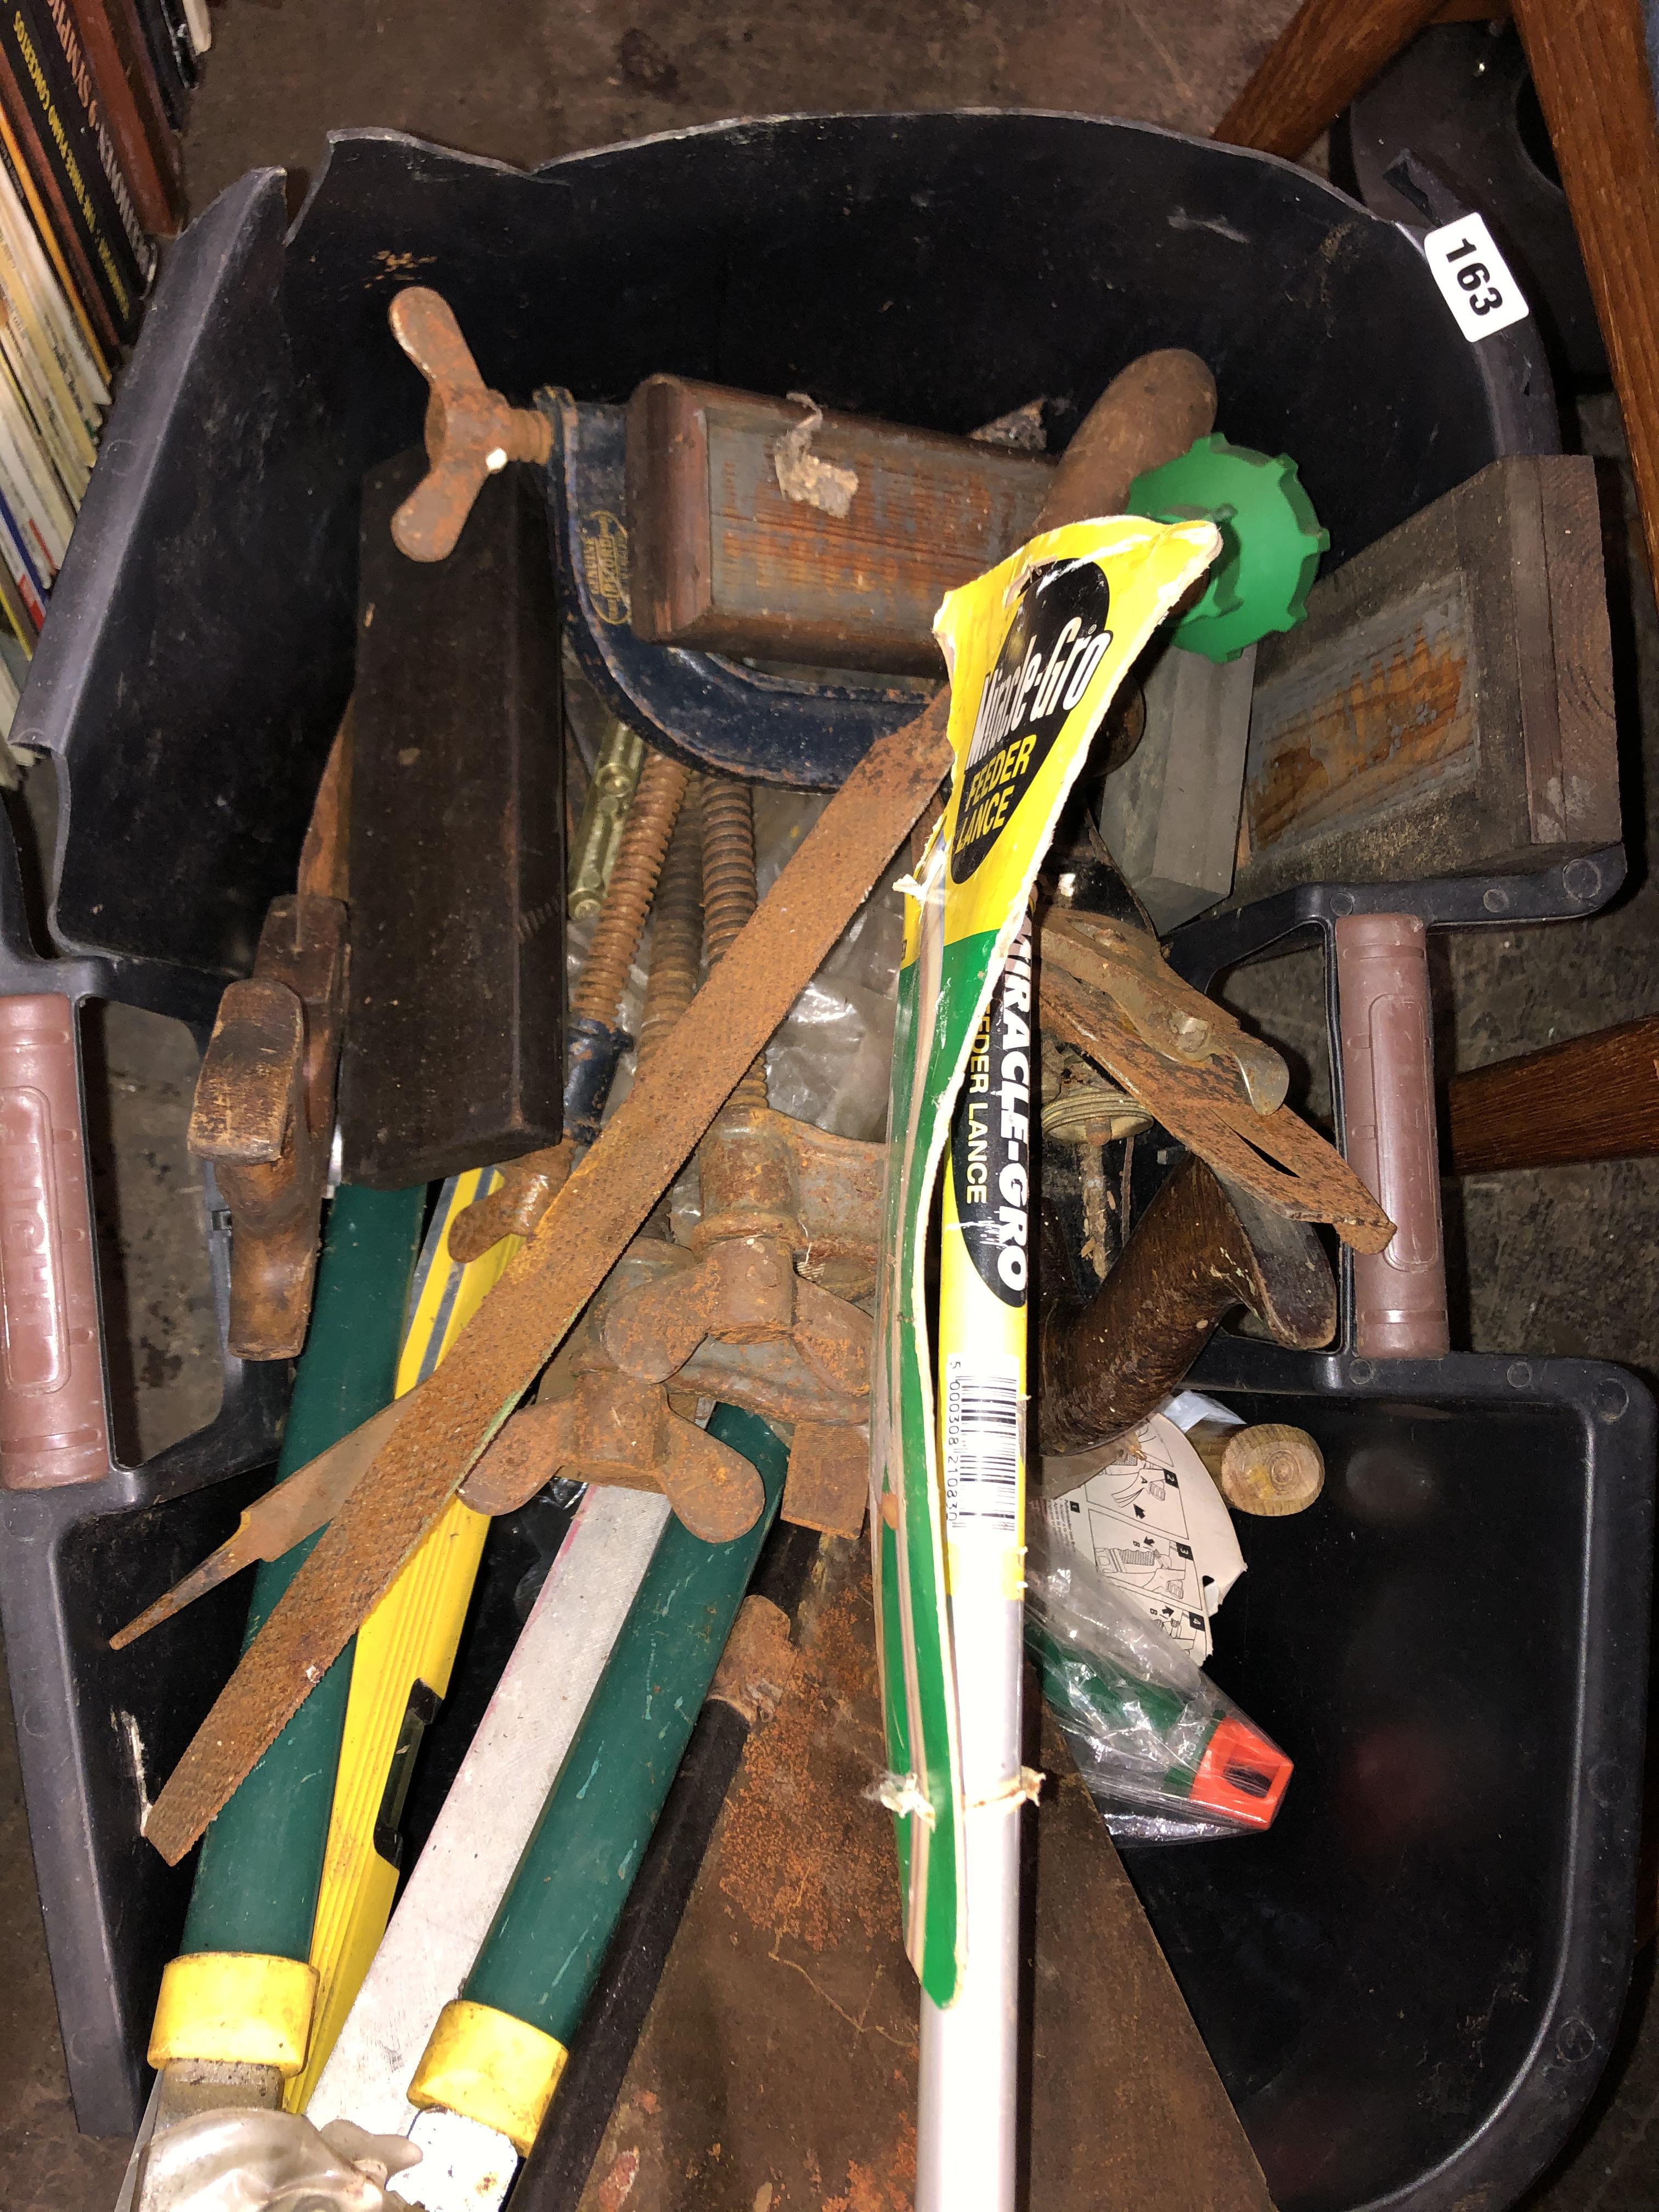 CRATE OF VARIOUS TOOLS INCLUDING SPEAR AND JACKSON SAW, G CLAMPS, GARDEN LOPPERS, PLANES, ETC. - Image 2 of 3